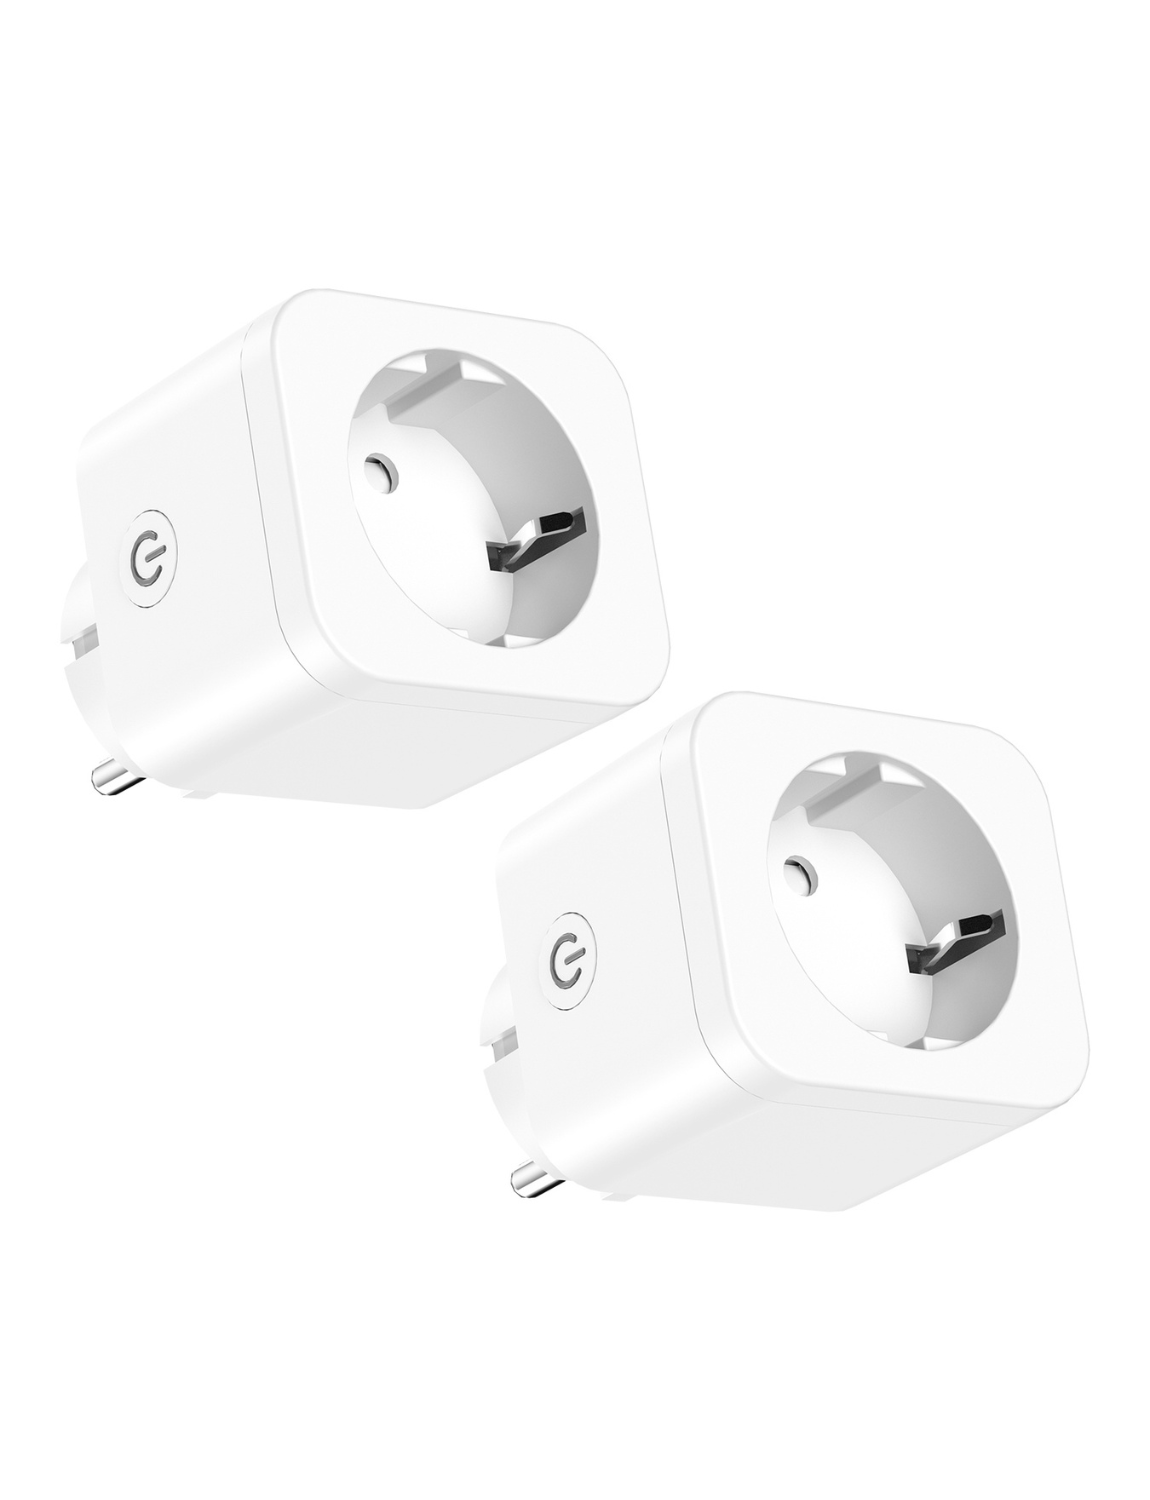 Score a 4-pack of meross mini smart plugs down at the $22  low ($5.50/ plug)